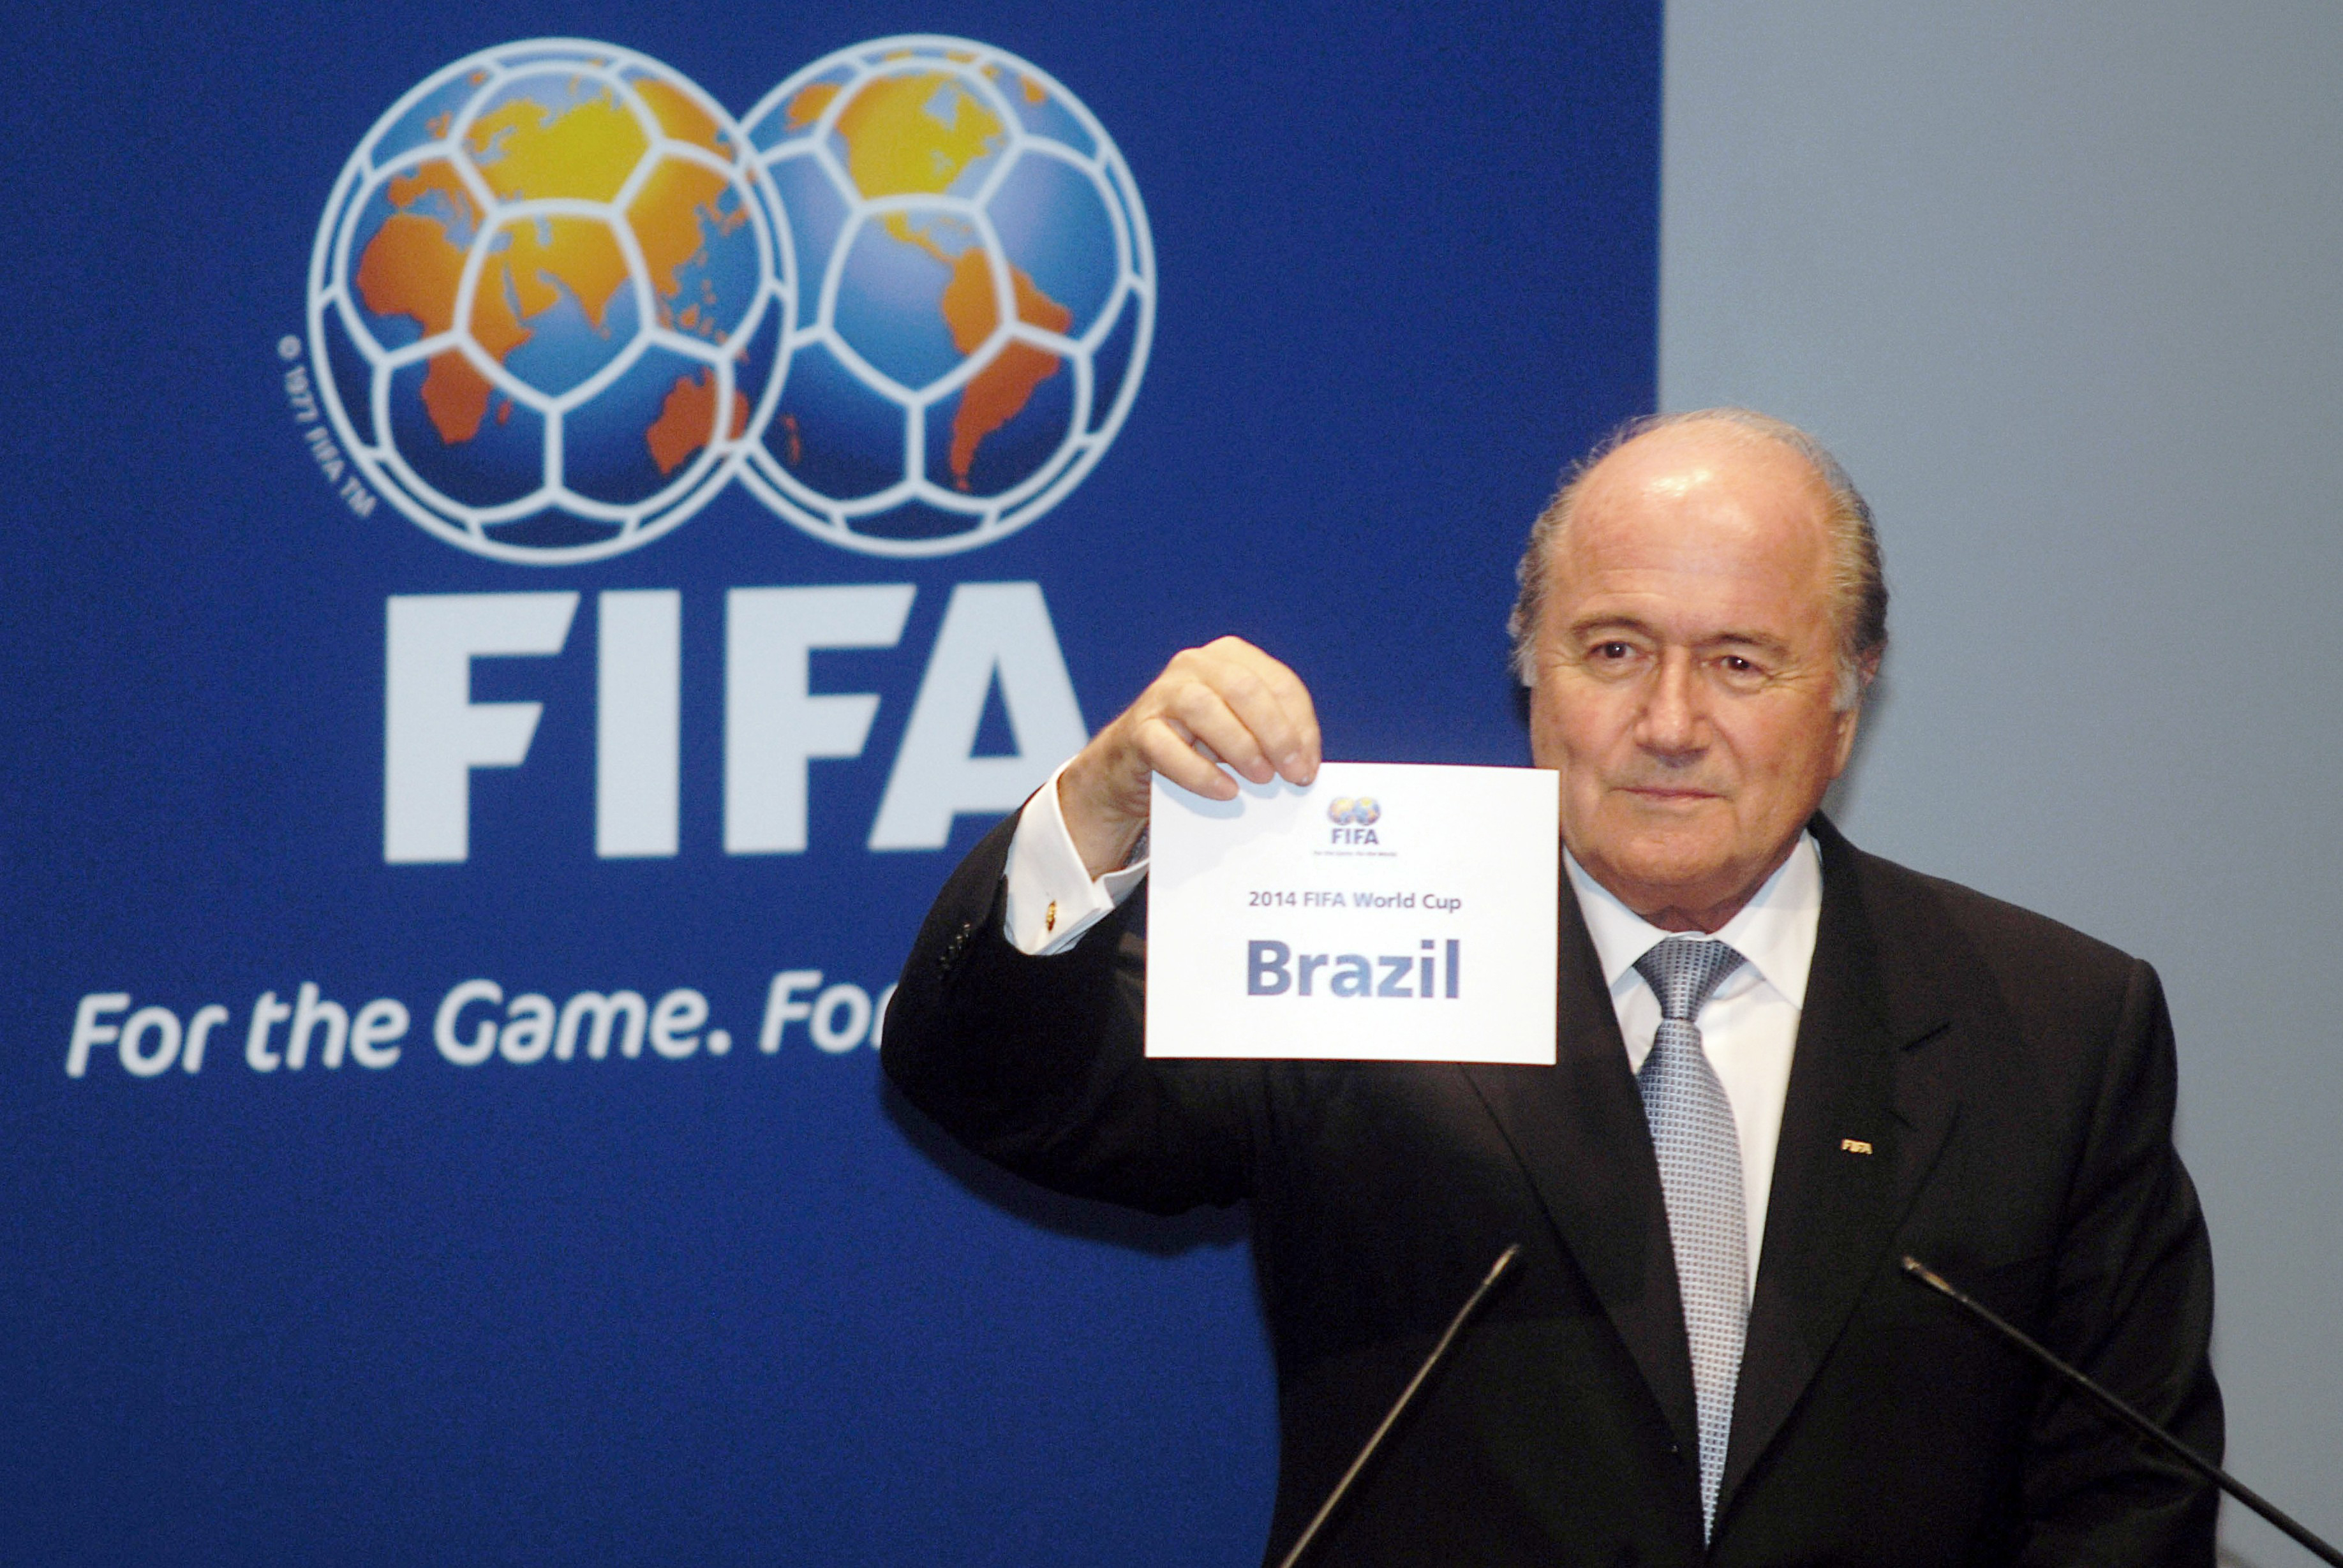 Sepp Blatter Announcing the 2014 FIFA World Cup host country